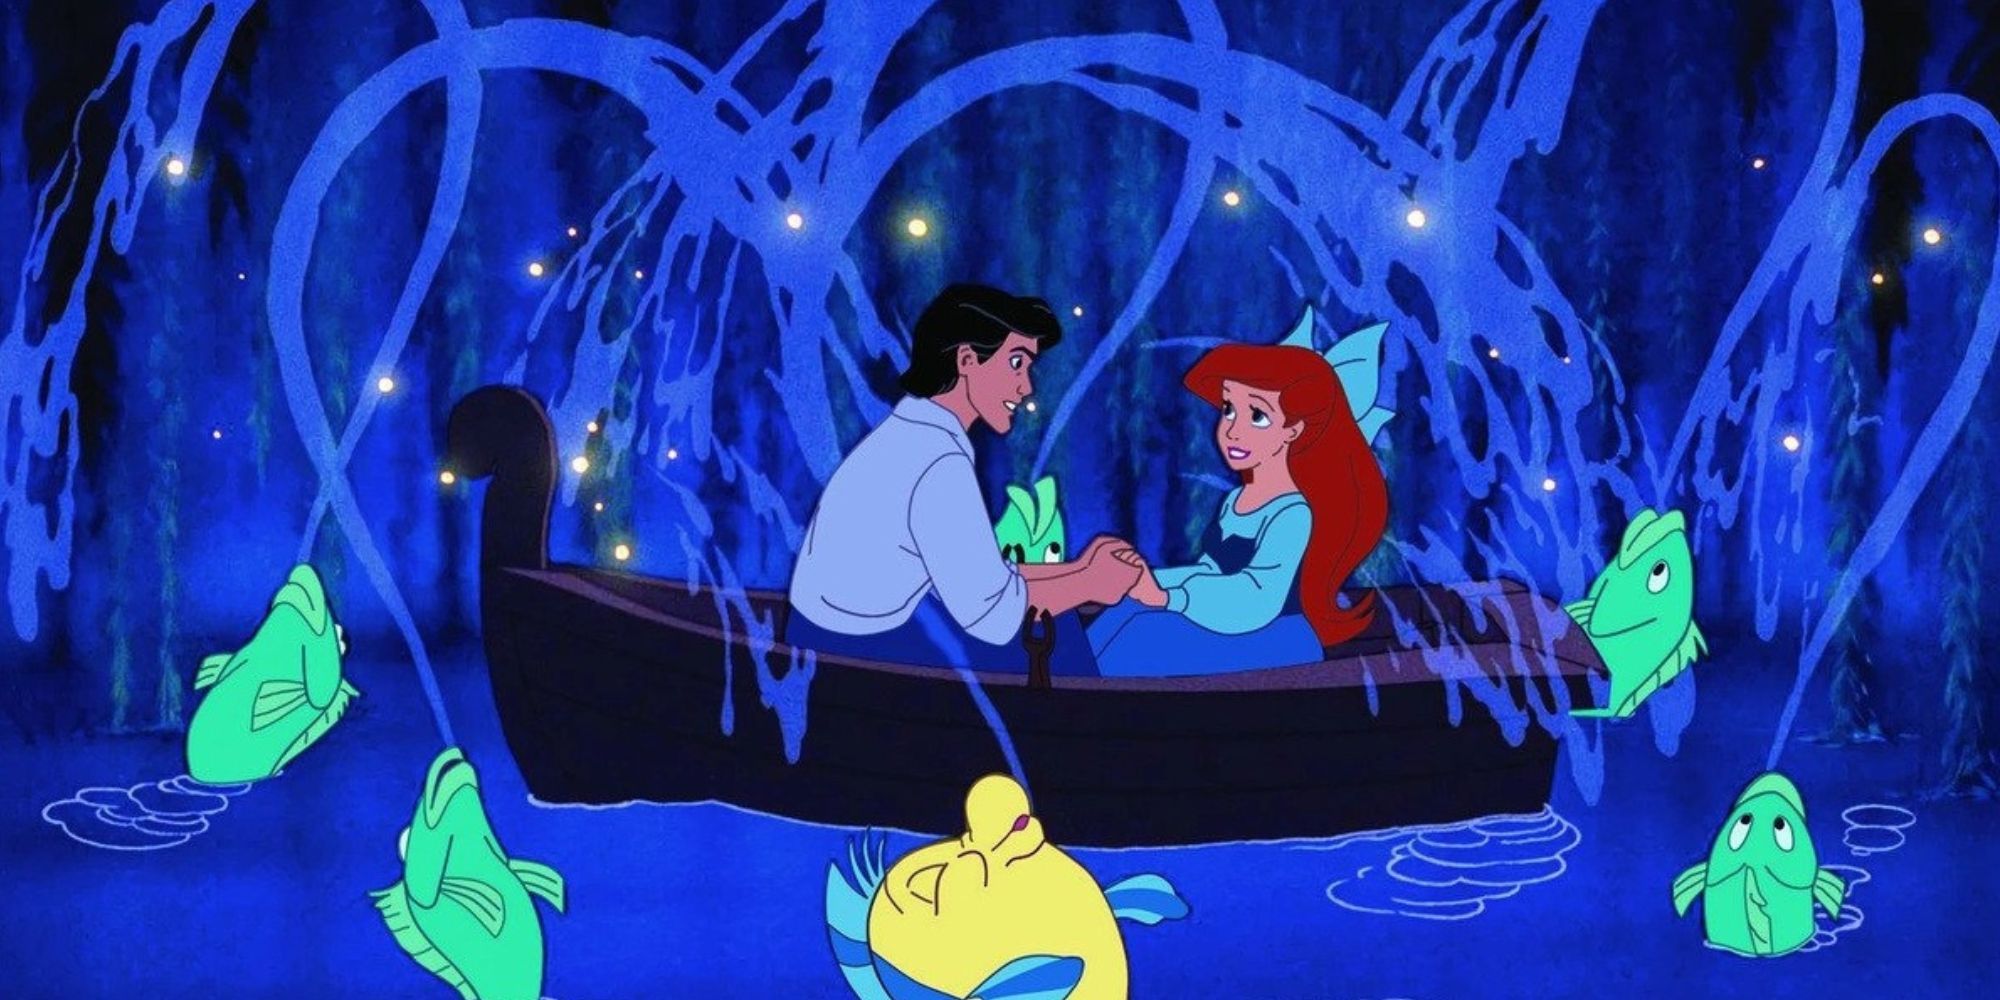 Ariel and Eric holding hands in a boat